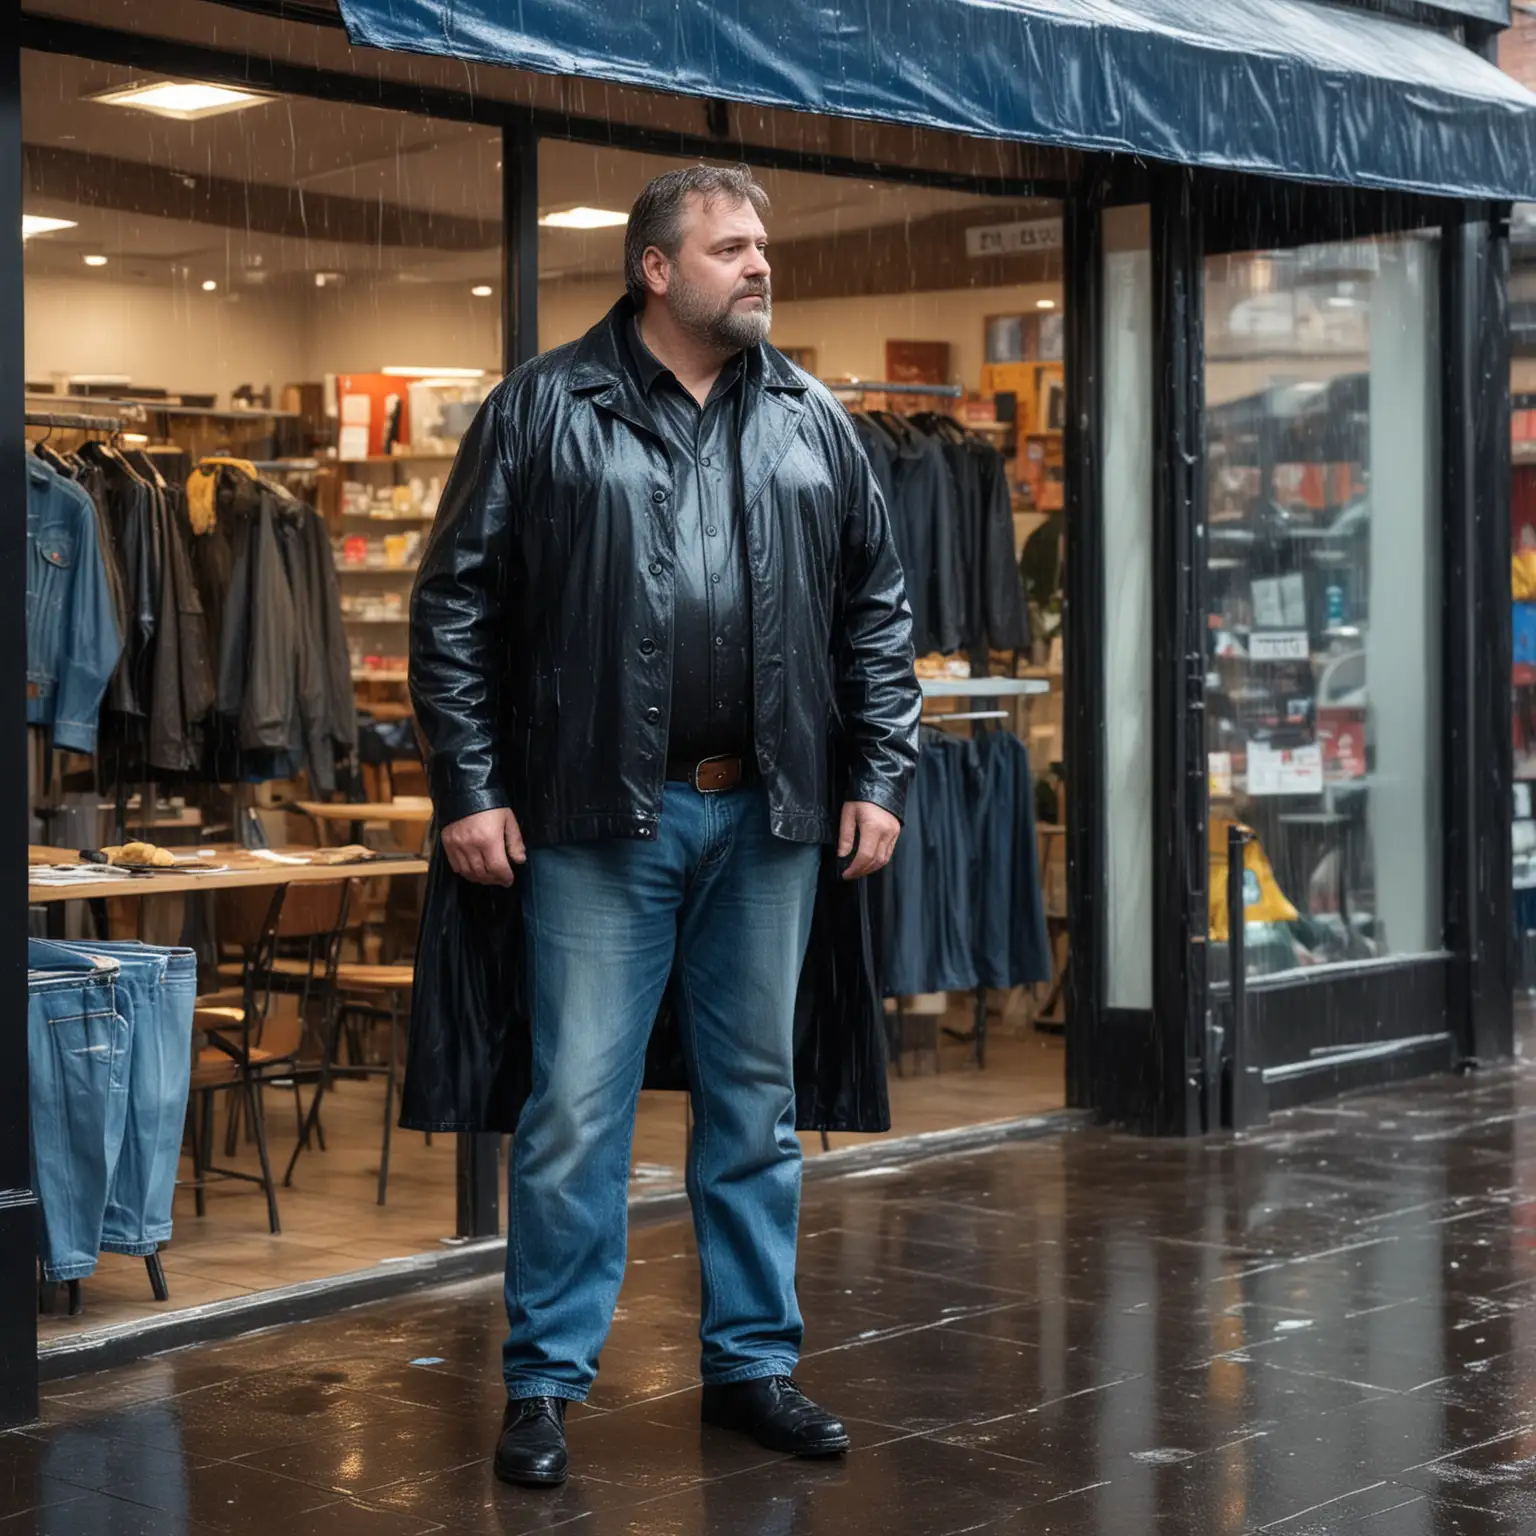 Rugged MiddleAged Man in Leather Jacket and Jeans Sheltering from Rain Under Shop Awning